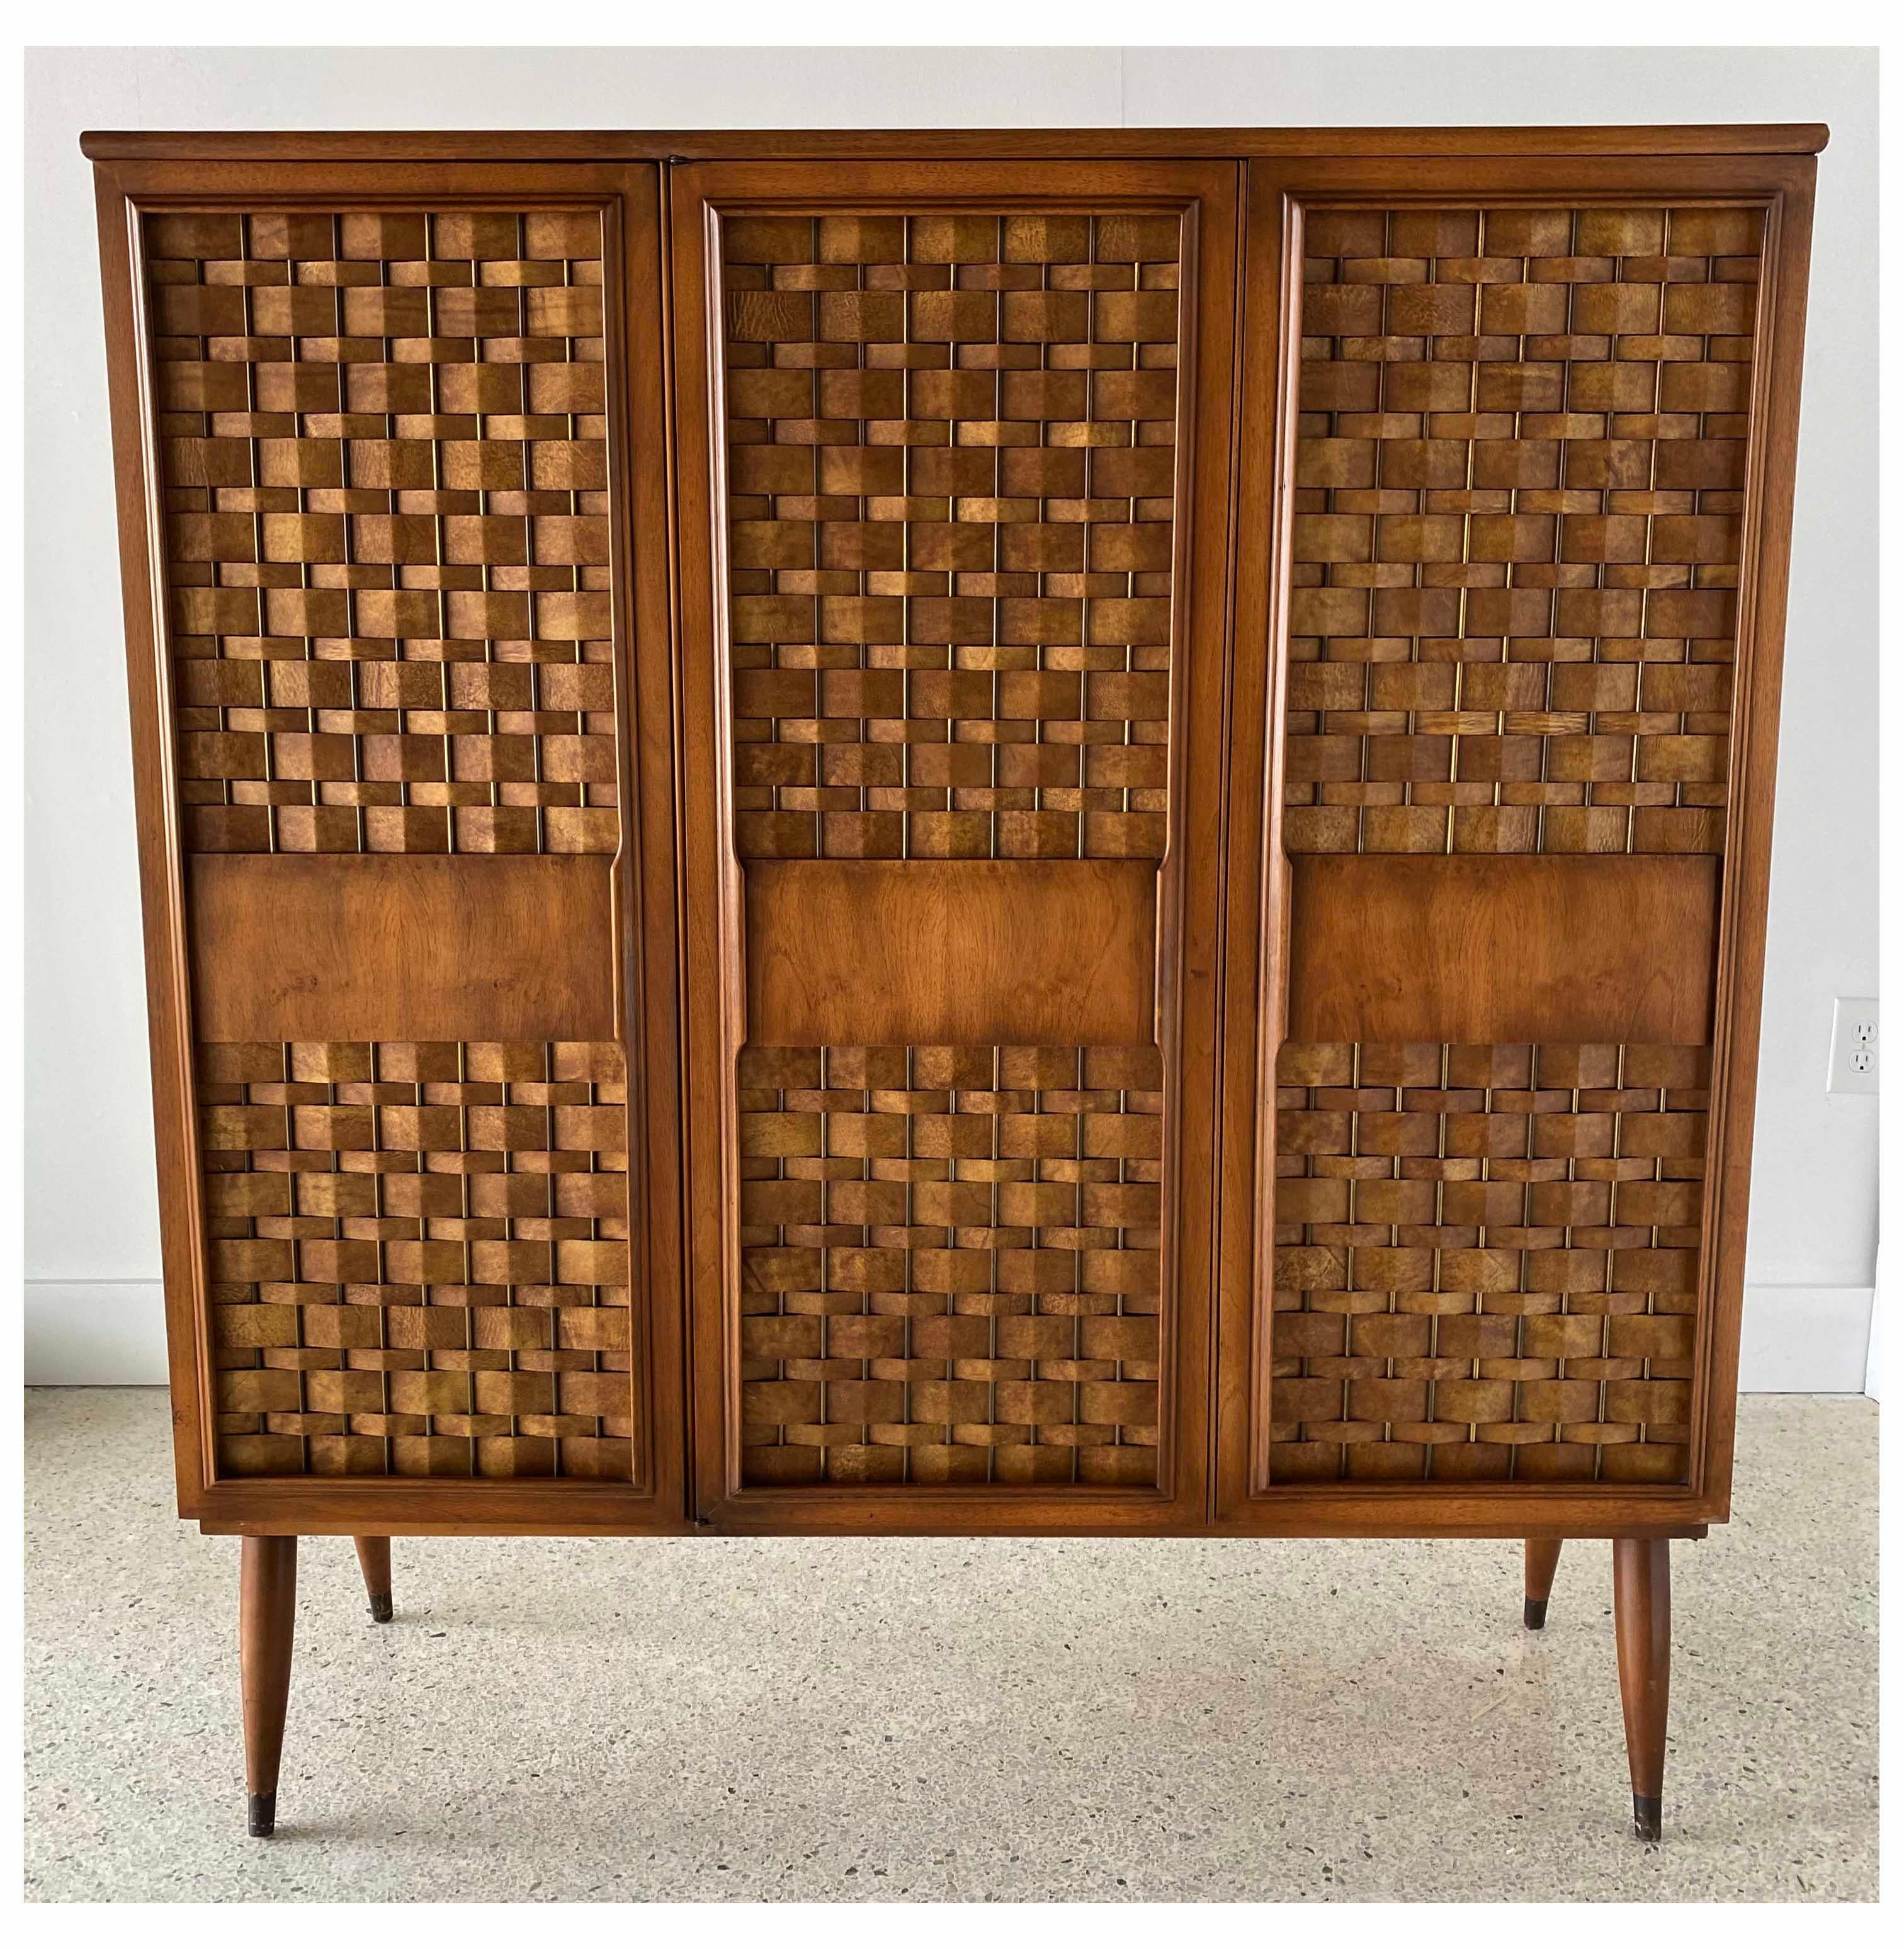 American modern upright 3 door cabinet by Dunbar. This cabinet features 2 storage sections comprised of three doors, each with capacity for 3 shelves. 
The cabinet has a shallow profile of 14